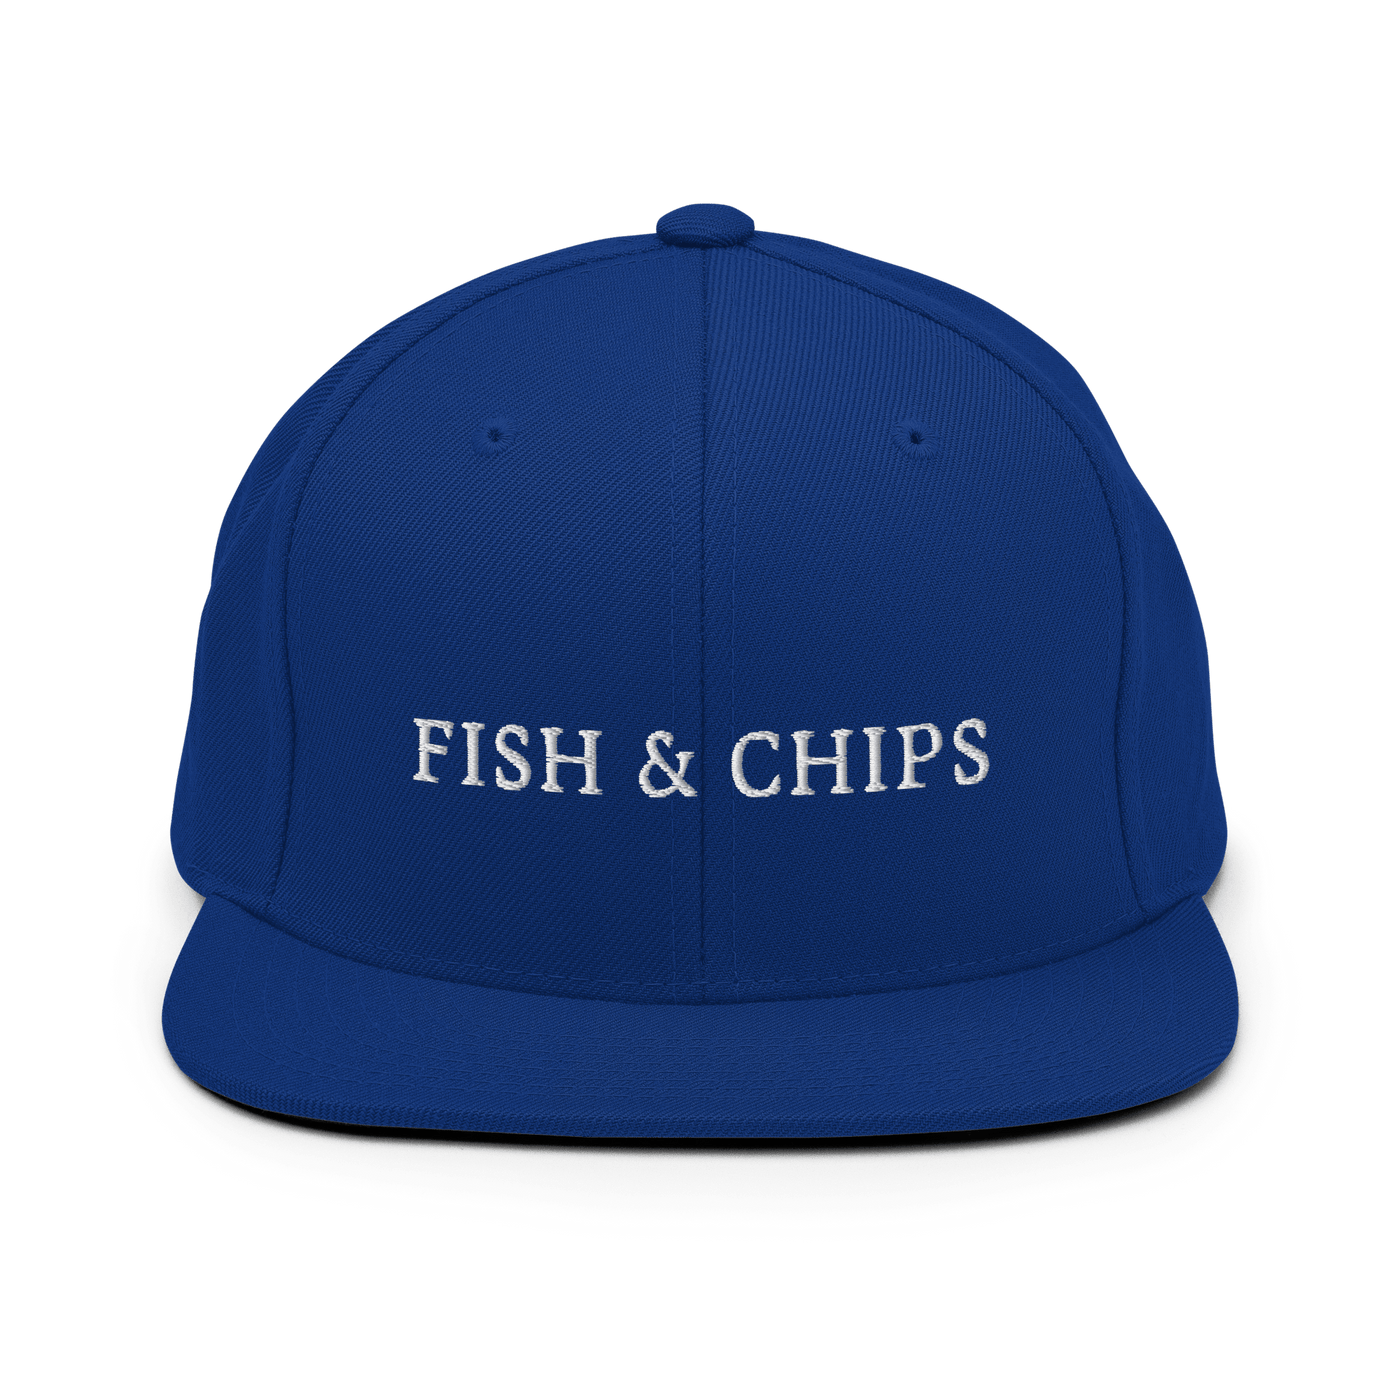 Fish & Chips Snapback Hat - Royal Blue - - Just Another Cap Store